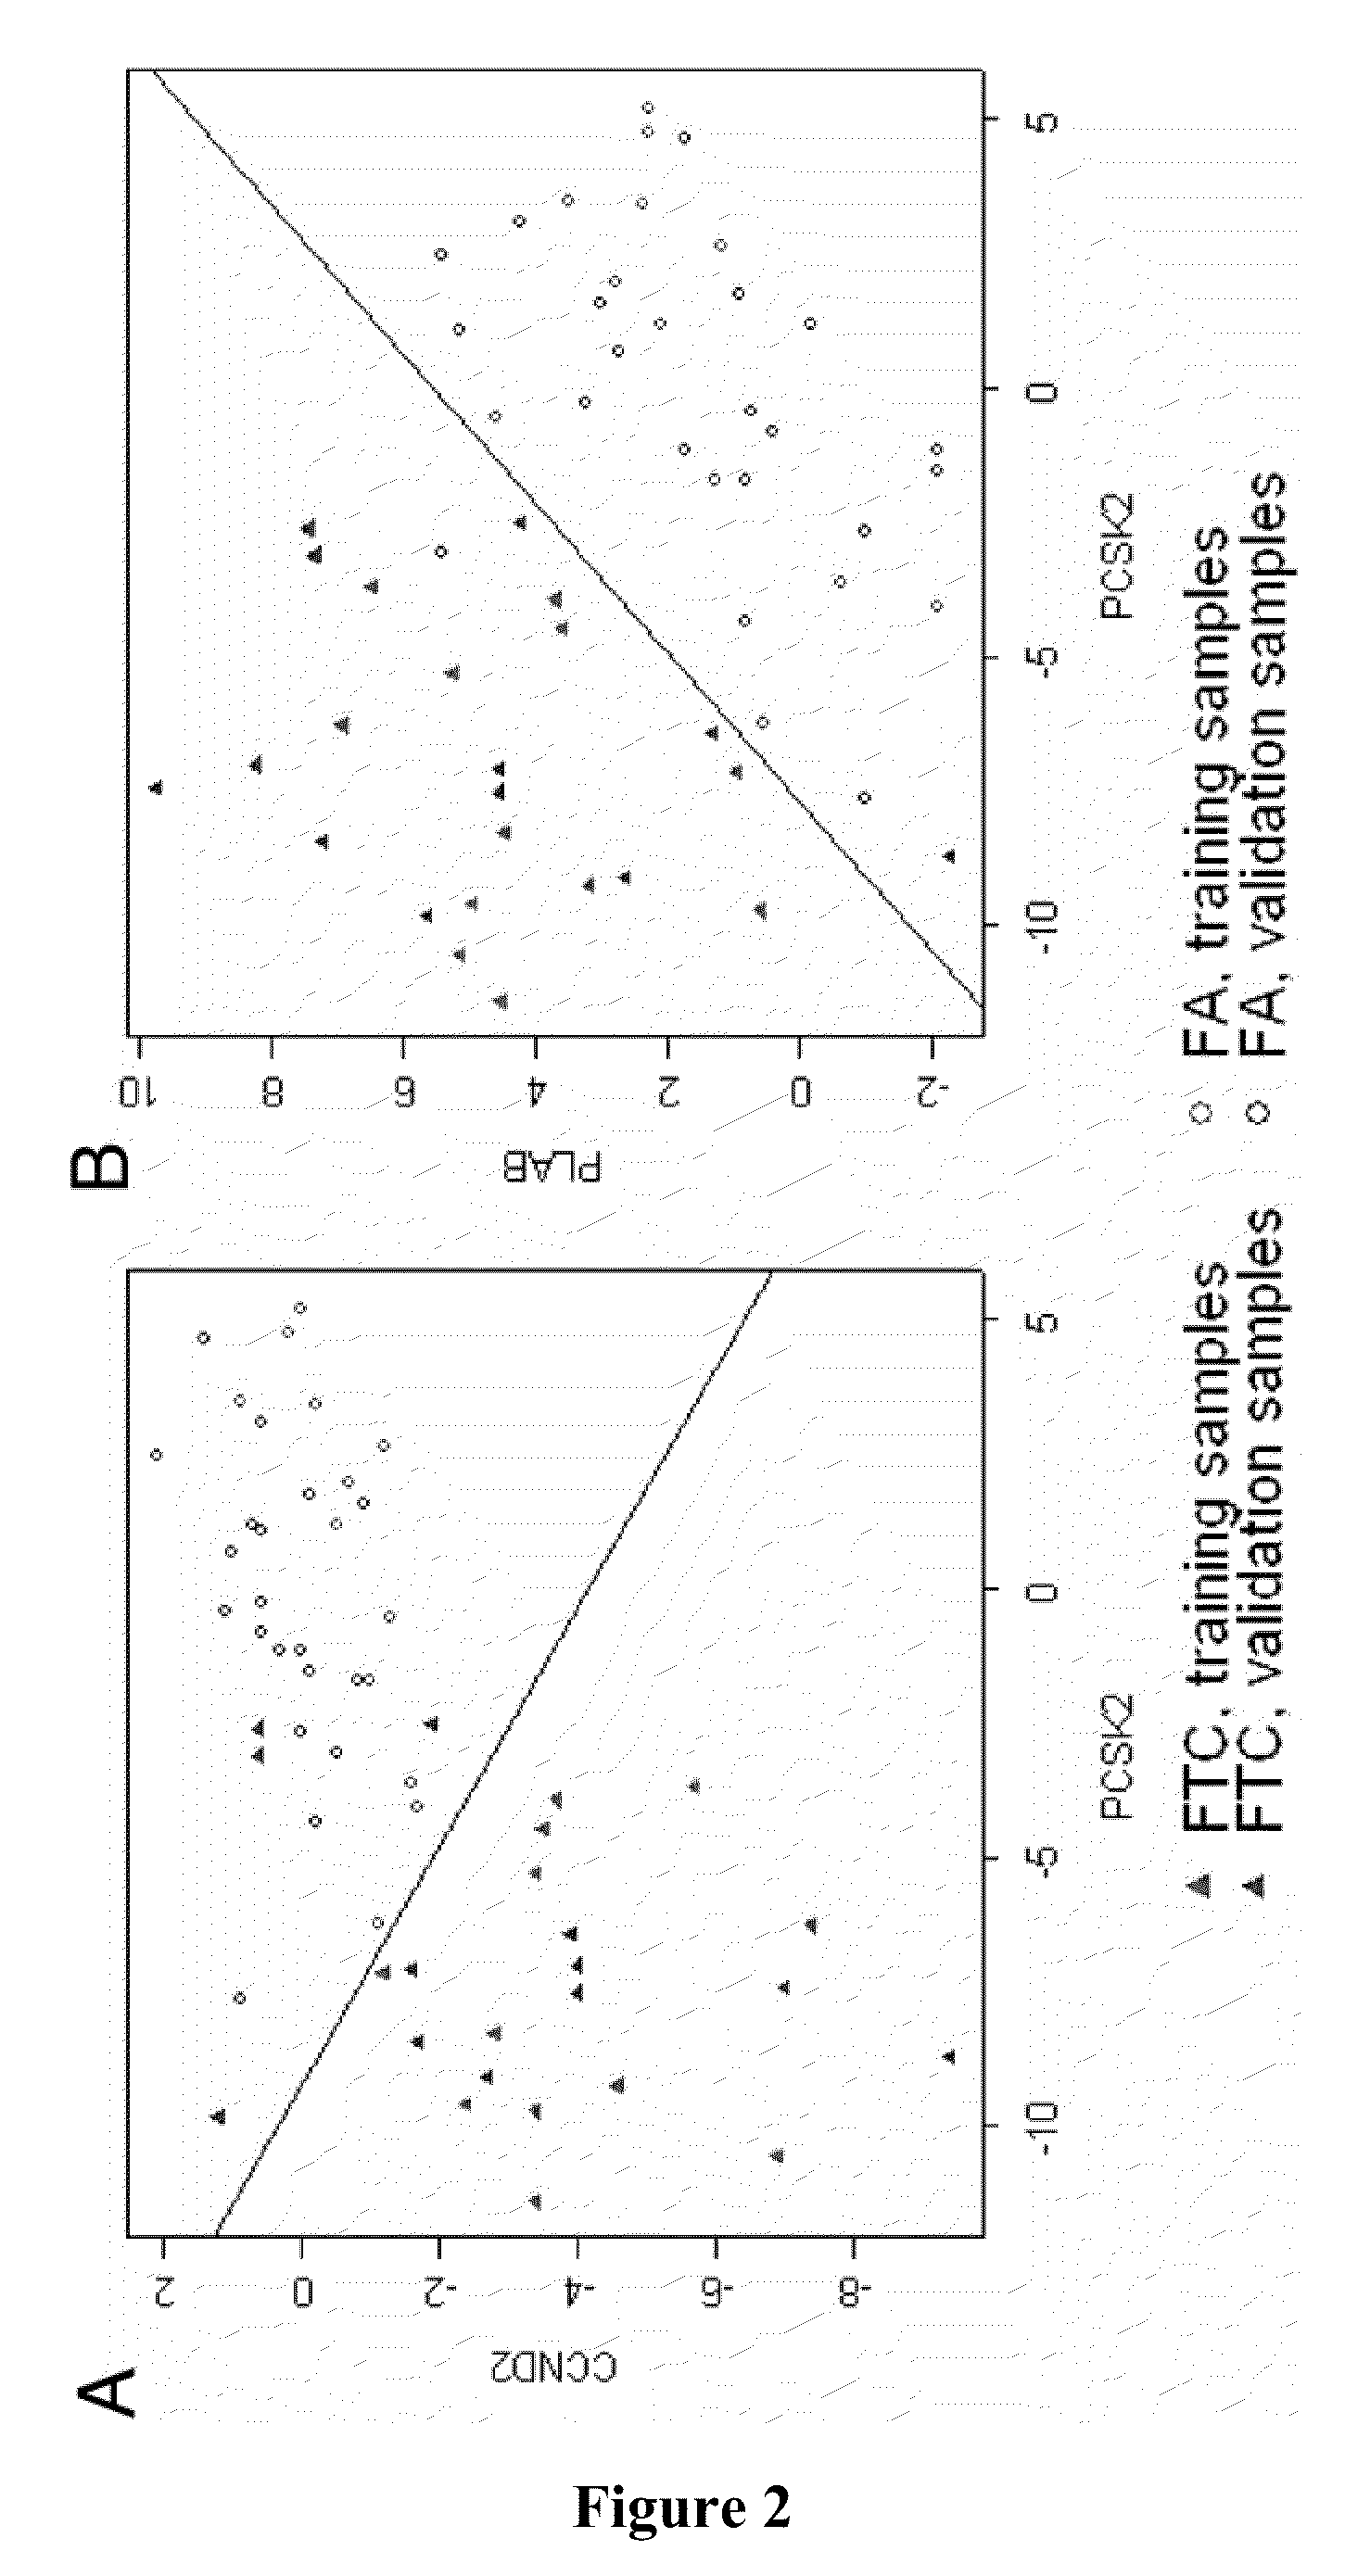 Method for differentiating malignant from benign thyroid tissue